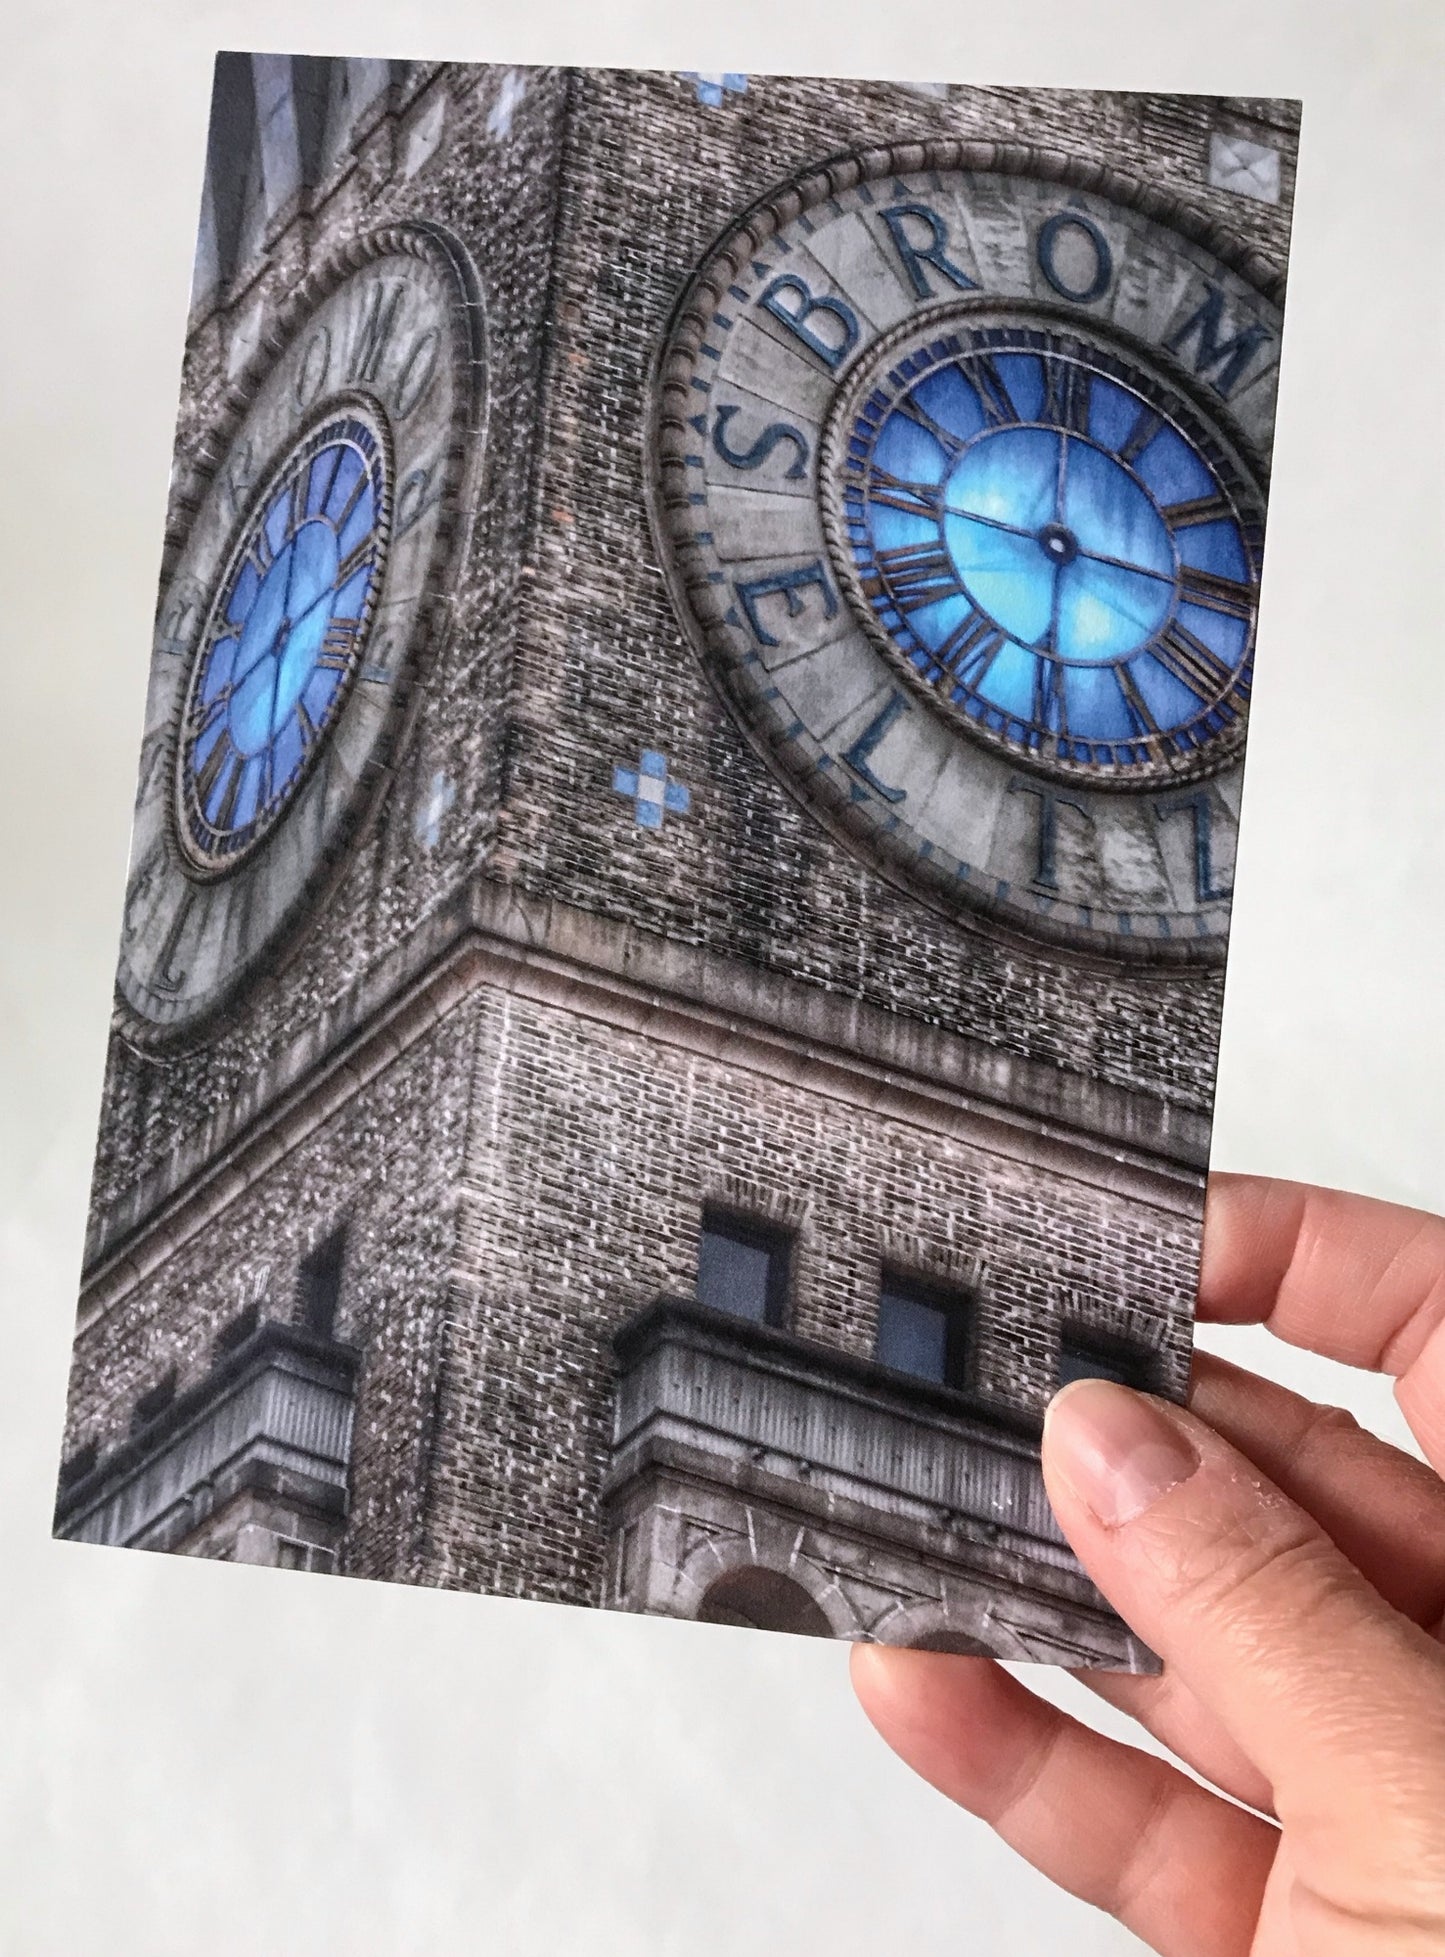 Bromo Seltzer Tower, Baltimore MD | 4.75" x 6.75" Limited Edition Signed Fine Art Photography print by Marianna Mills